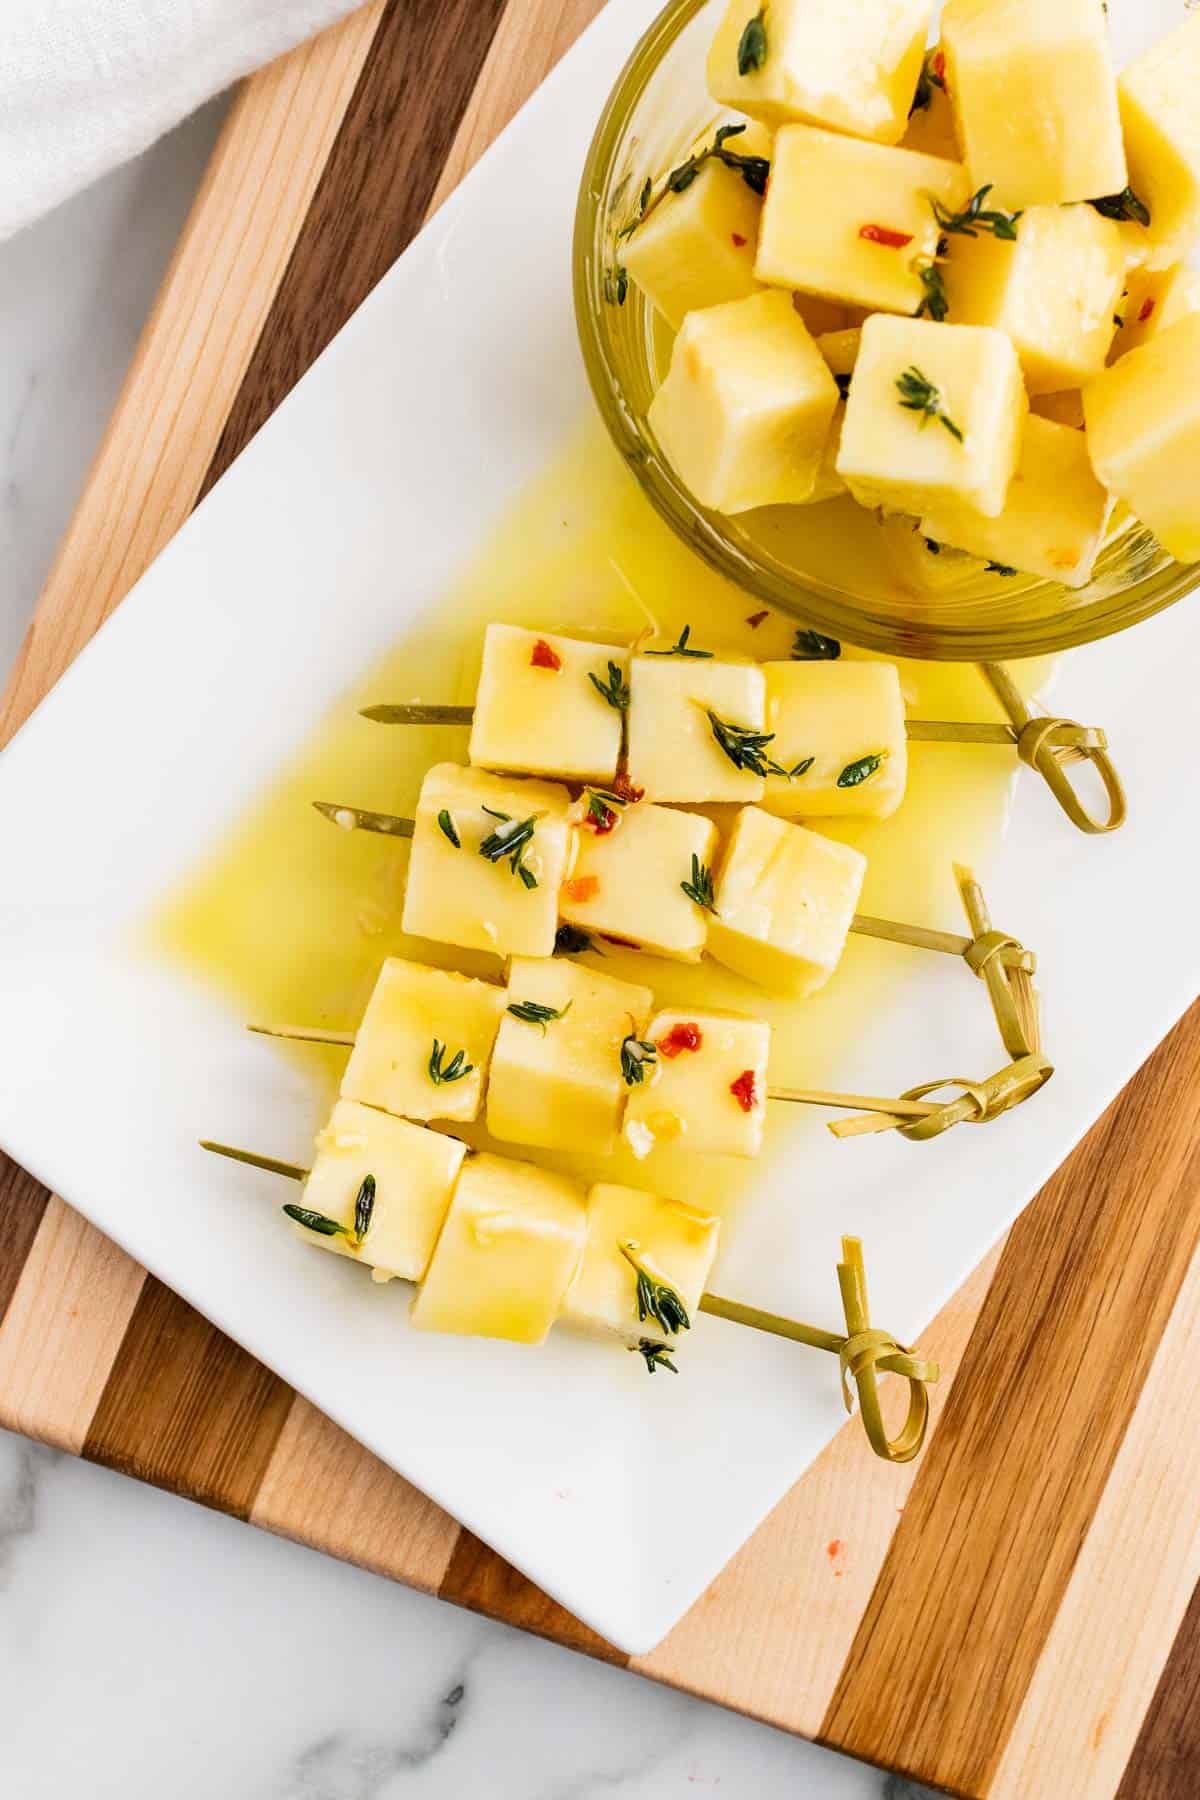 Skewers with three cheese cubes each next to a ramekin of more cheese cubes on a wooden serving tray